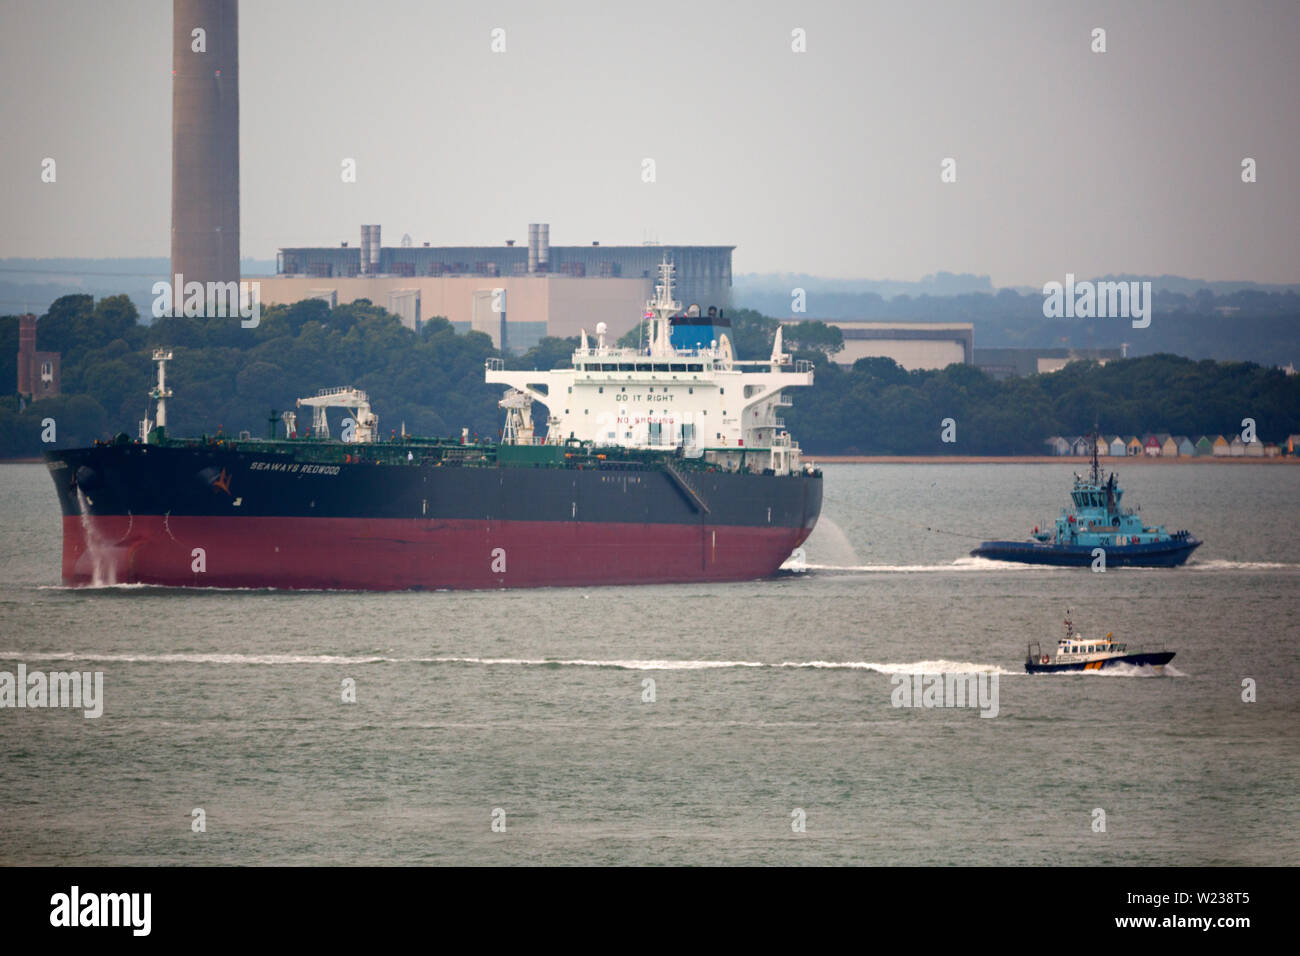 Chemical,Oil,Tanker,Seaways Redwood, Fawley,Refinery, Southampton,The Solent,Cowes,Isle of Wight,England,UK, Stock Photo